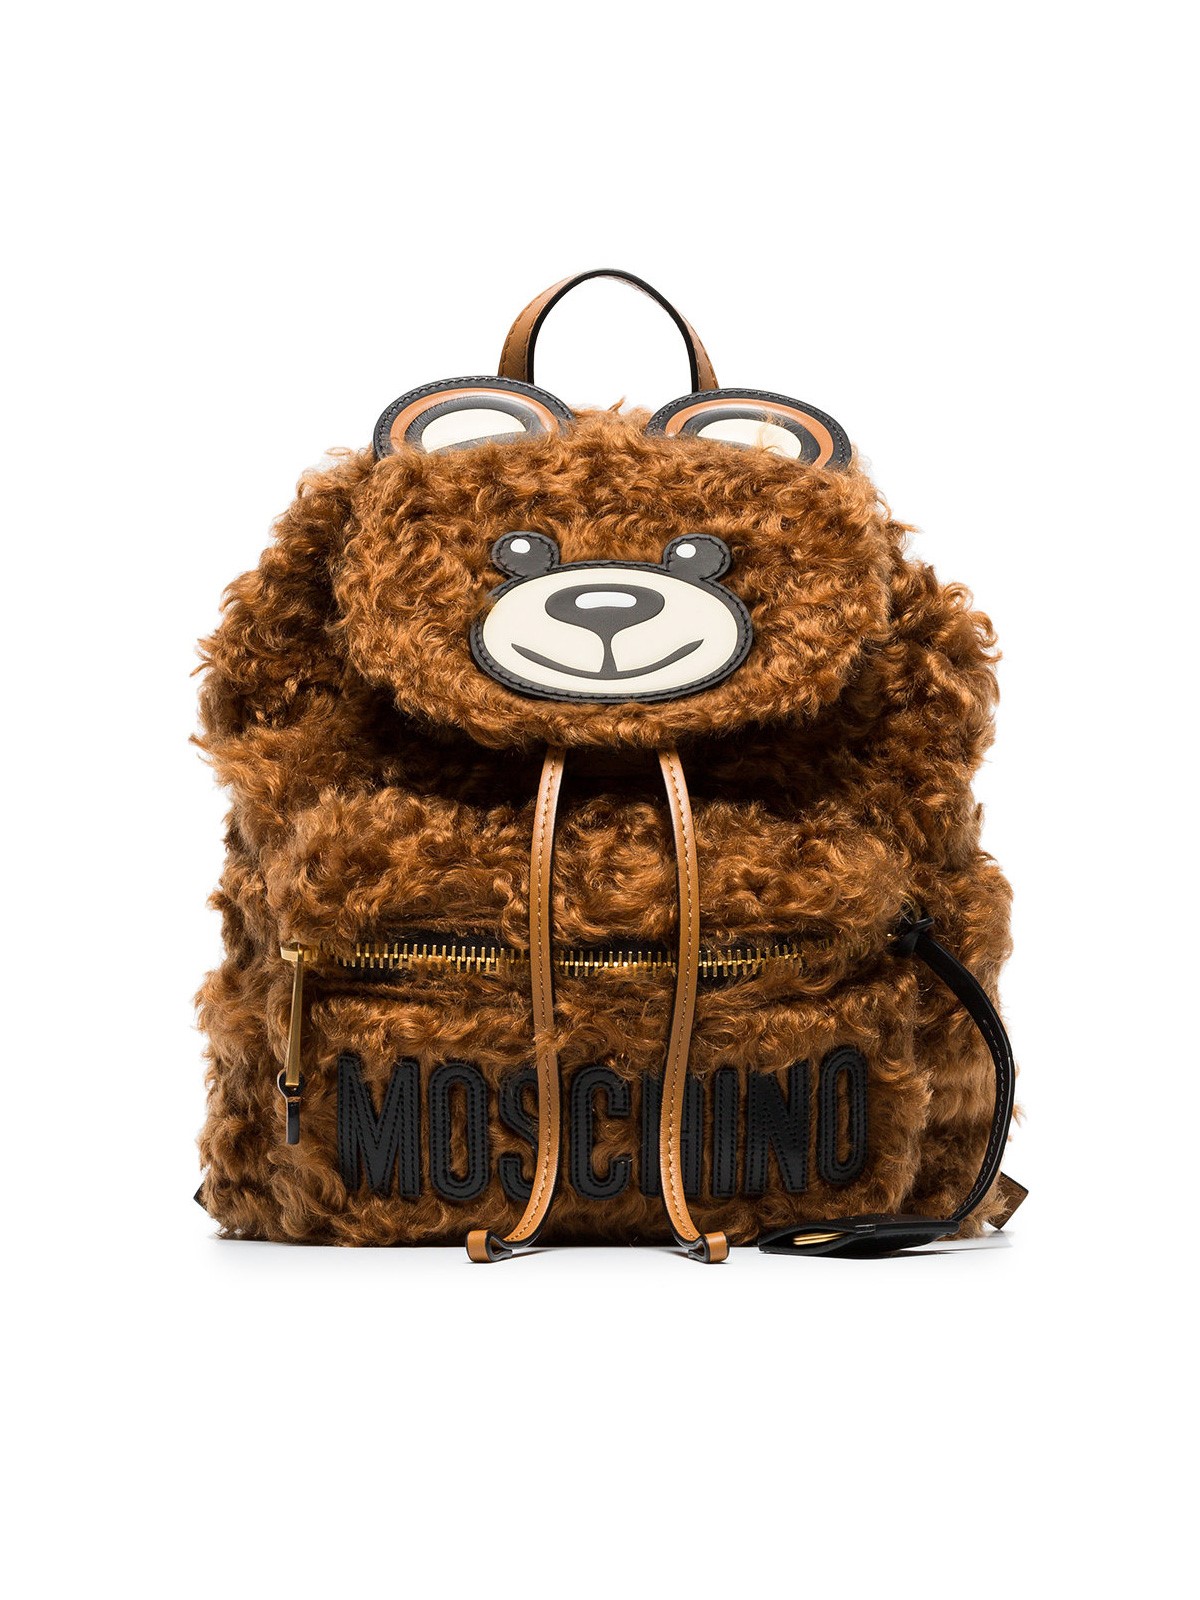 moschino TEDDY BEAR BACKPACK available on montiboutique.com - 23253